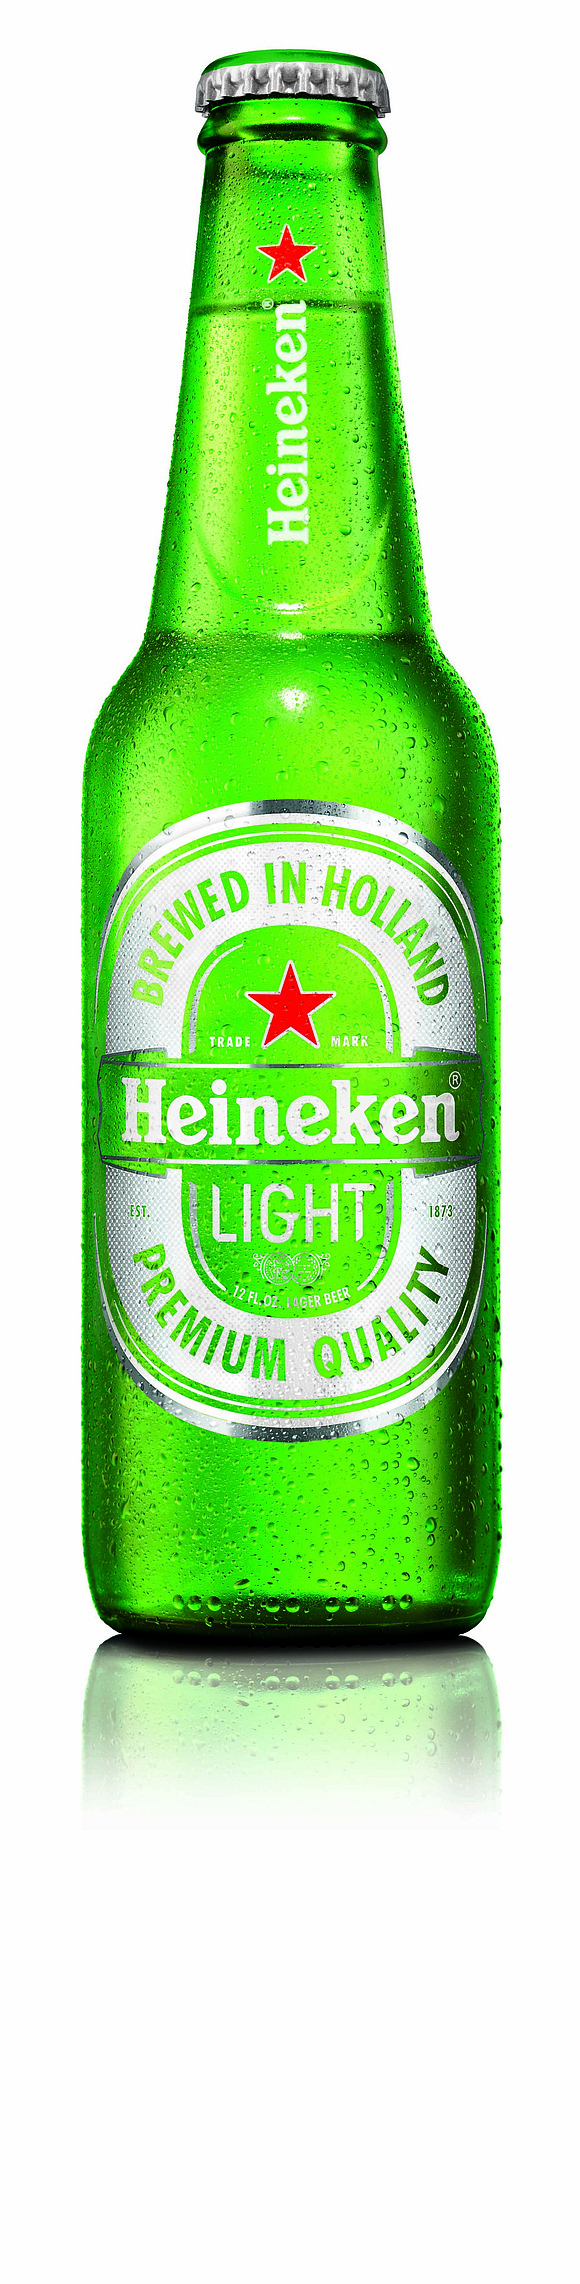 Heineken said Monday it has pulled an ad with the tagline "Sometimes lighter is better" after critics slammed it as …